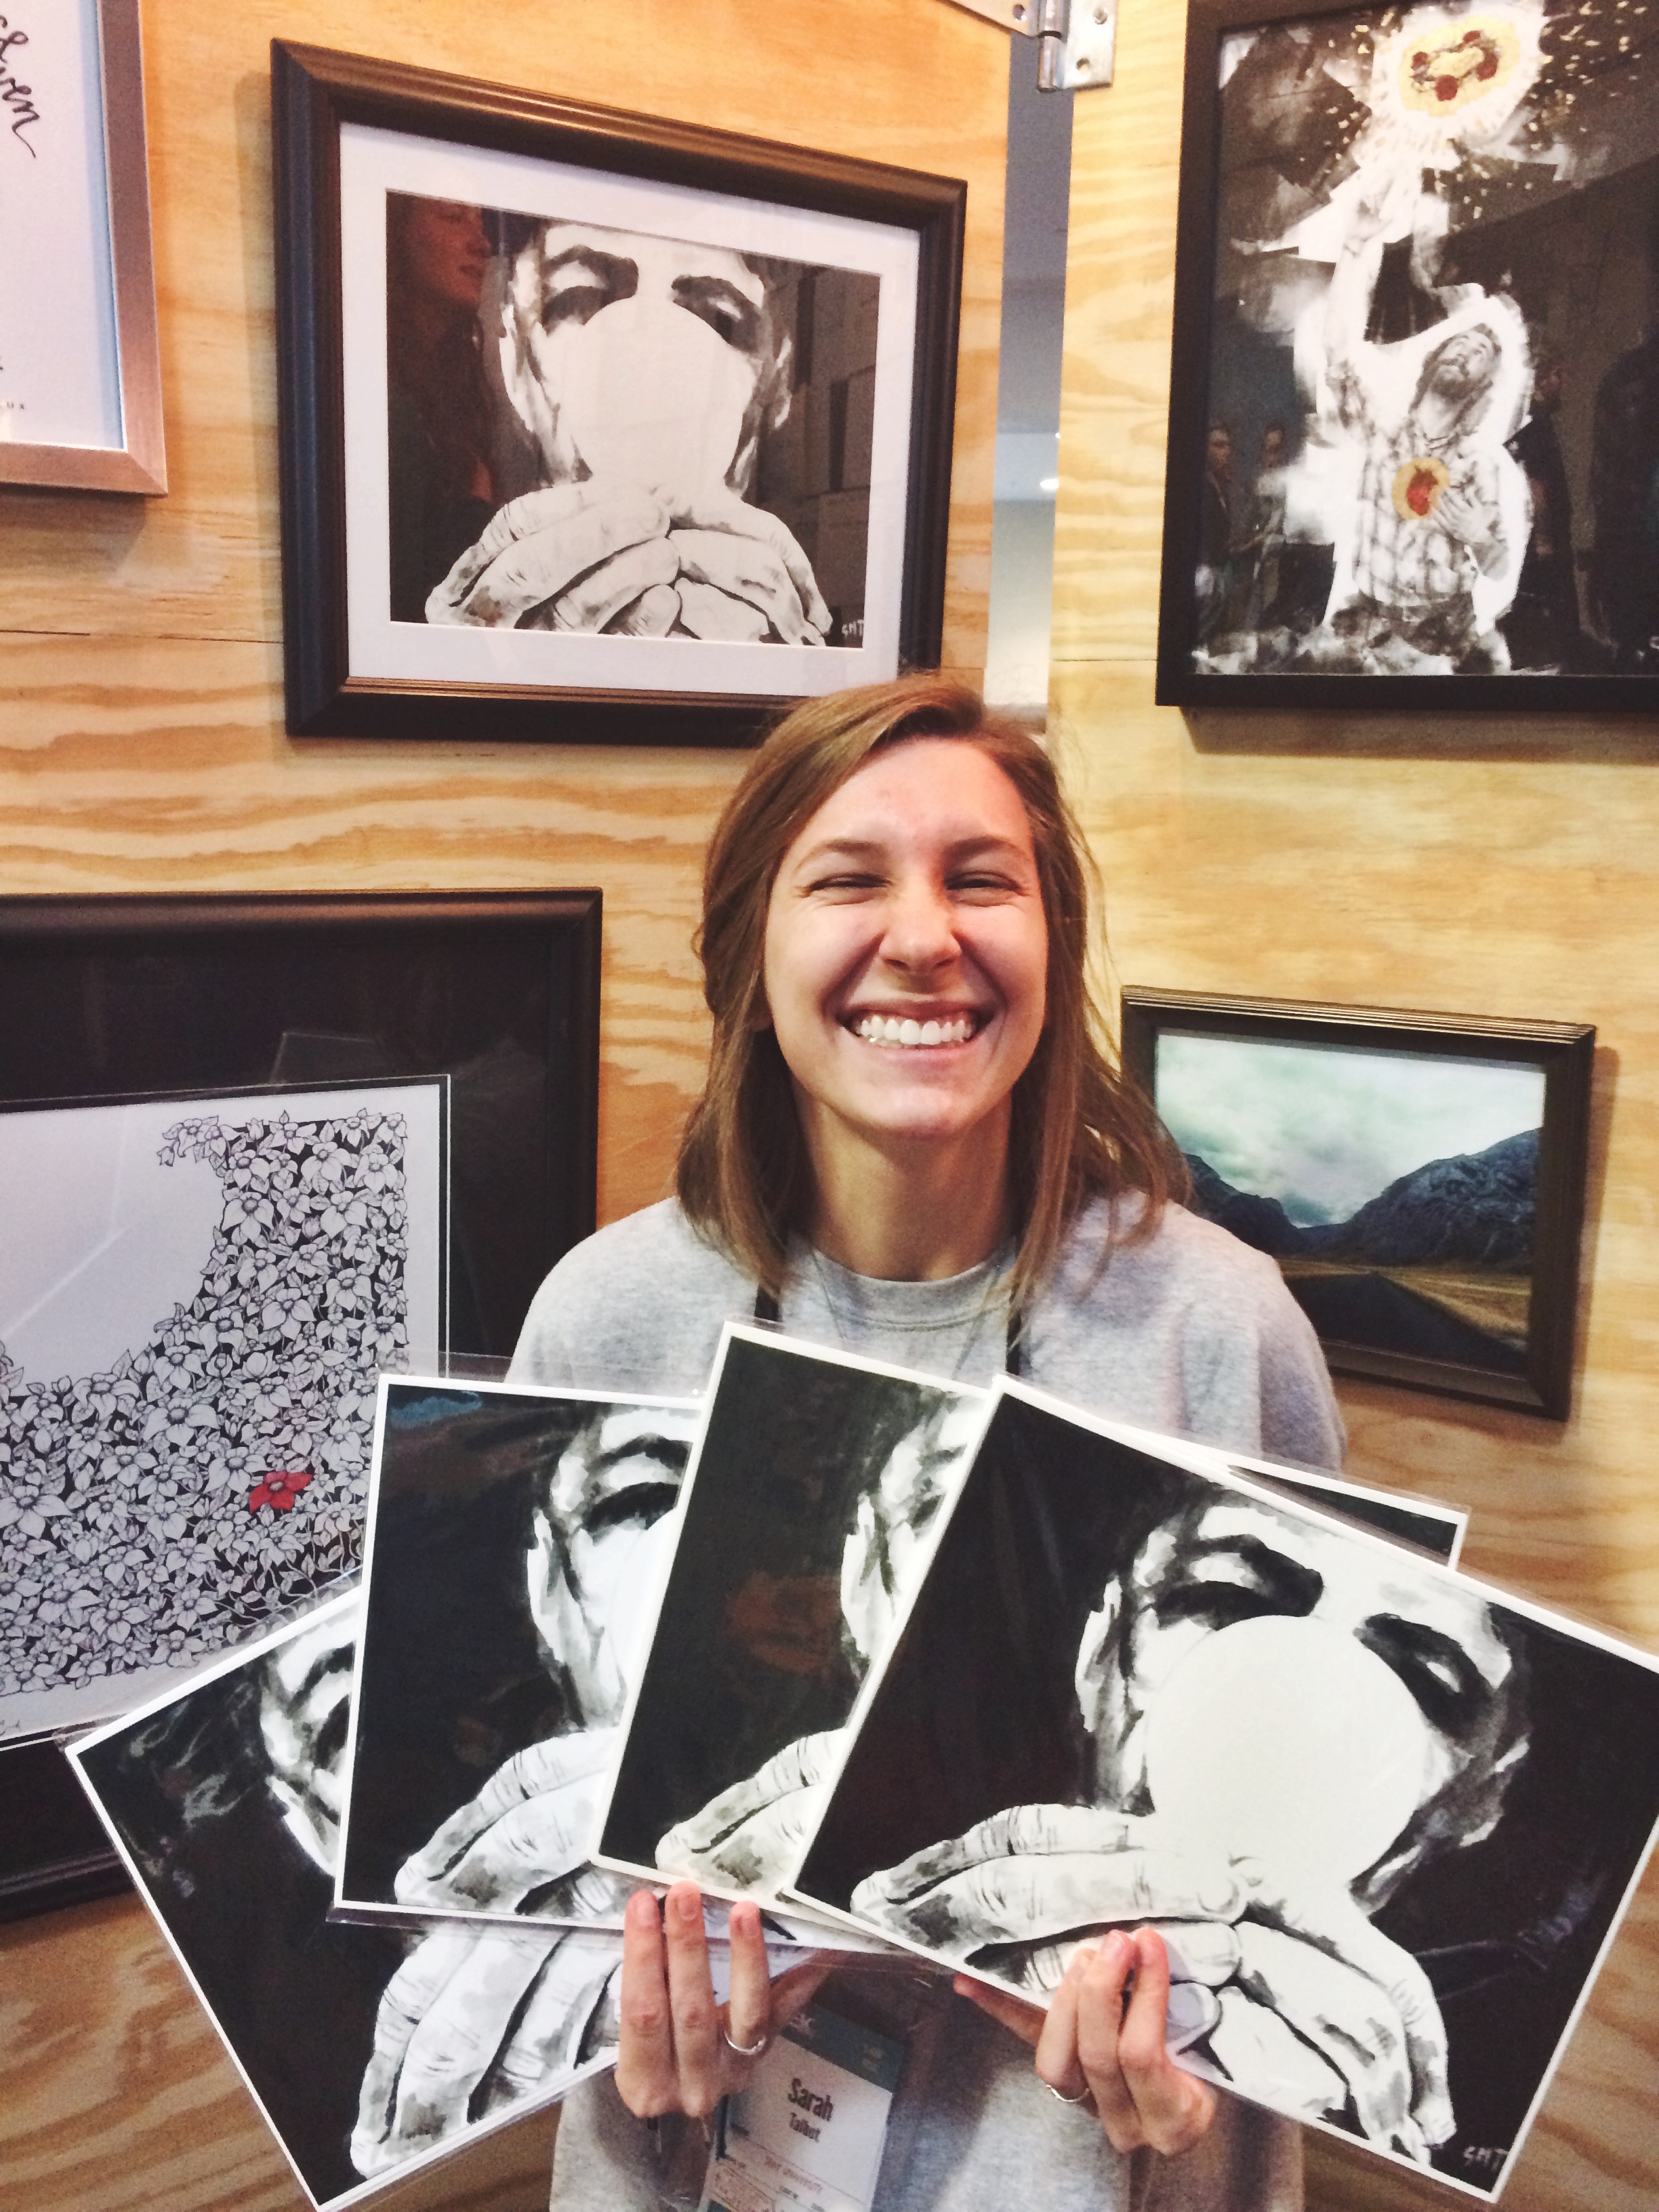 This Tory University Student Is Making a Business Selling Wild Religious Paintings 